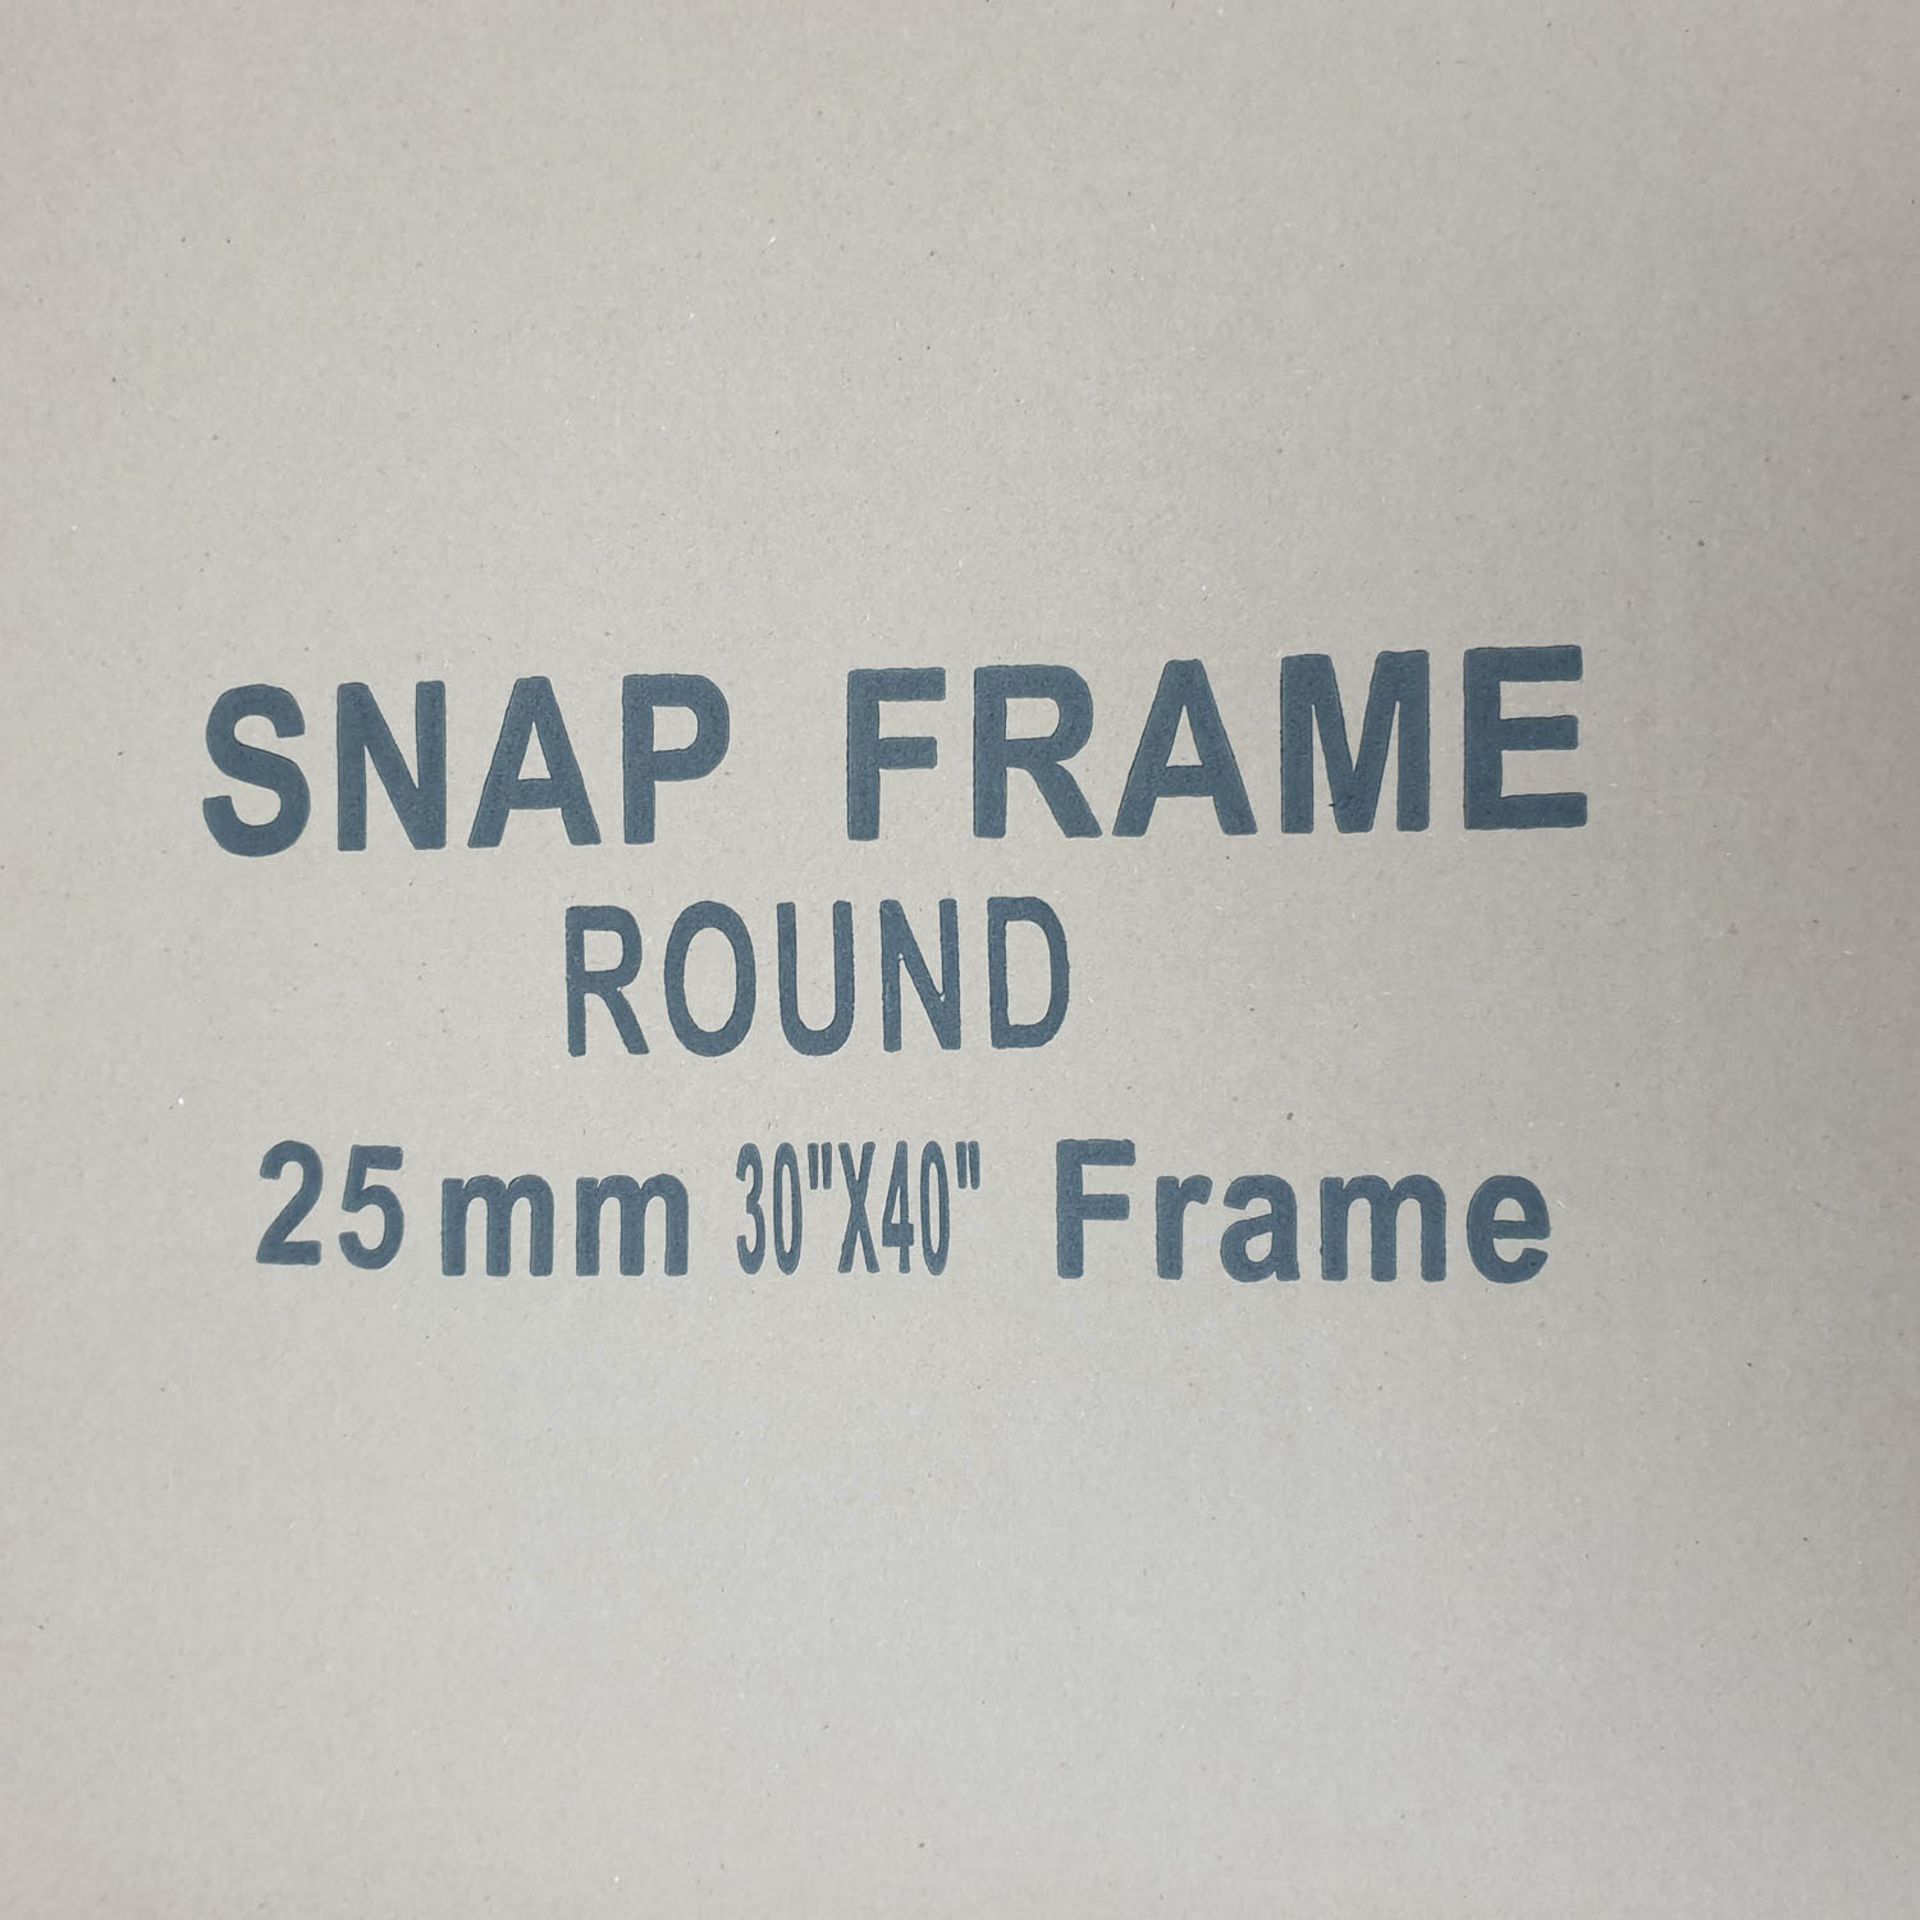 40 x Snap Frame Round 25mm 30" x 40" Frame - Image 4 of 7